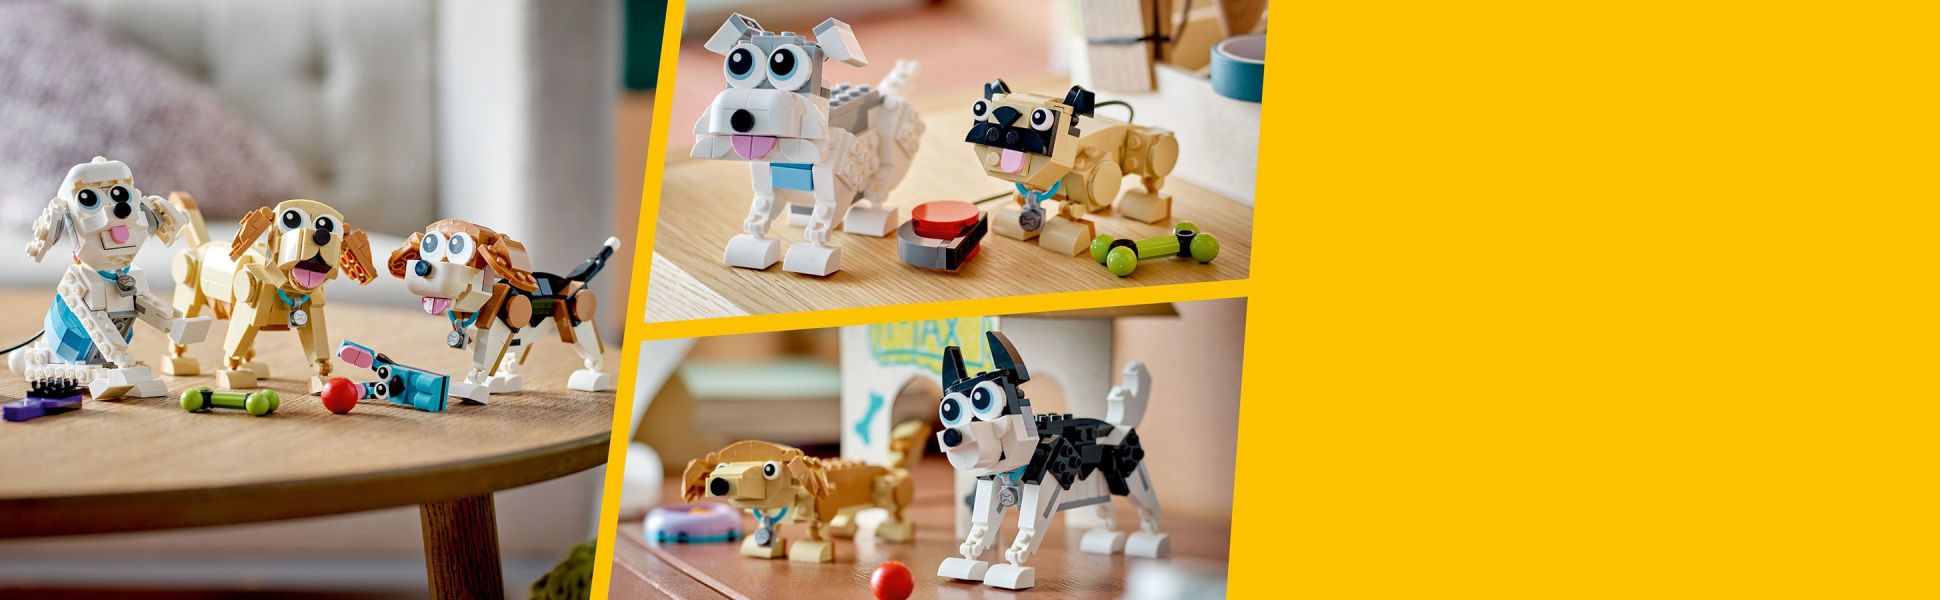 Creator 3 in 1 Adorable Dogs Set - A2Z Science & Learning Toy Store